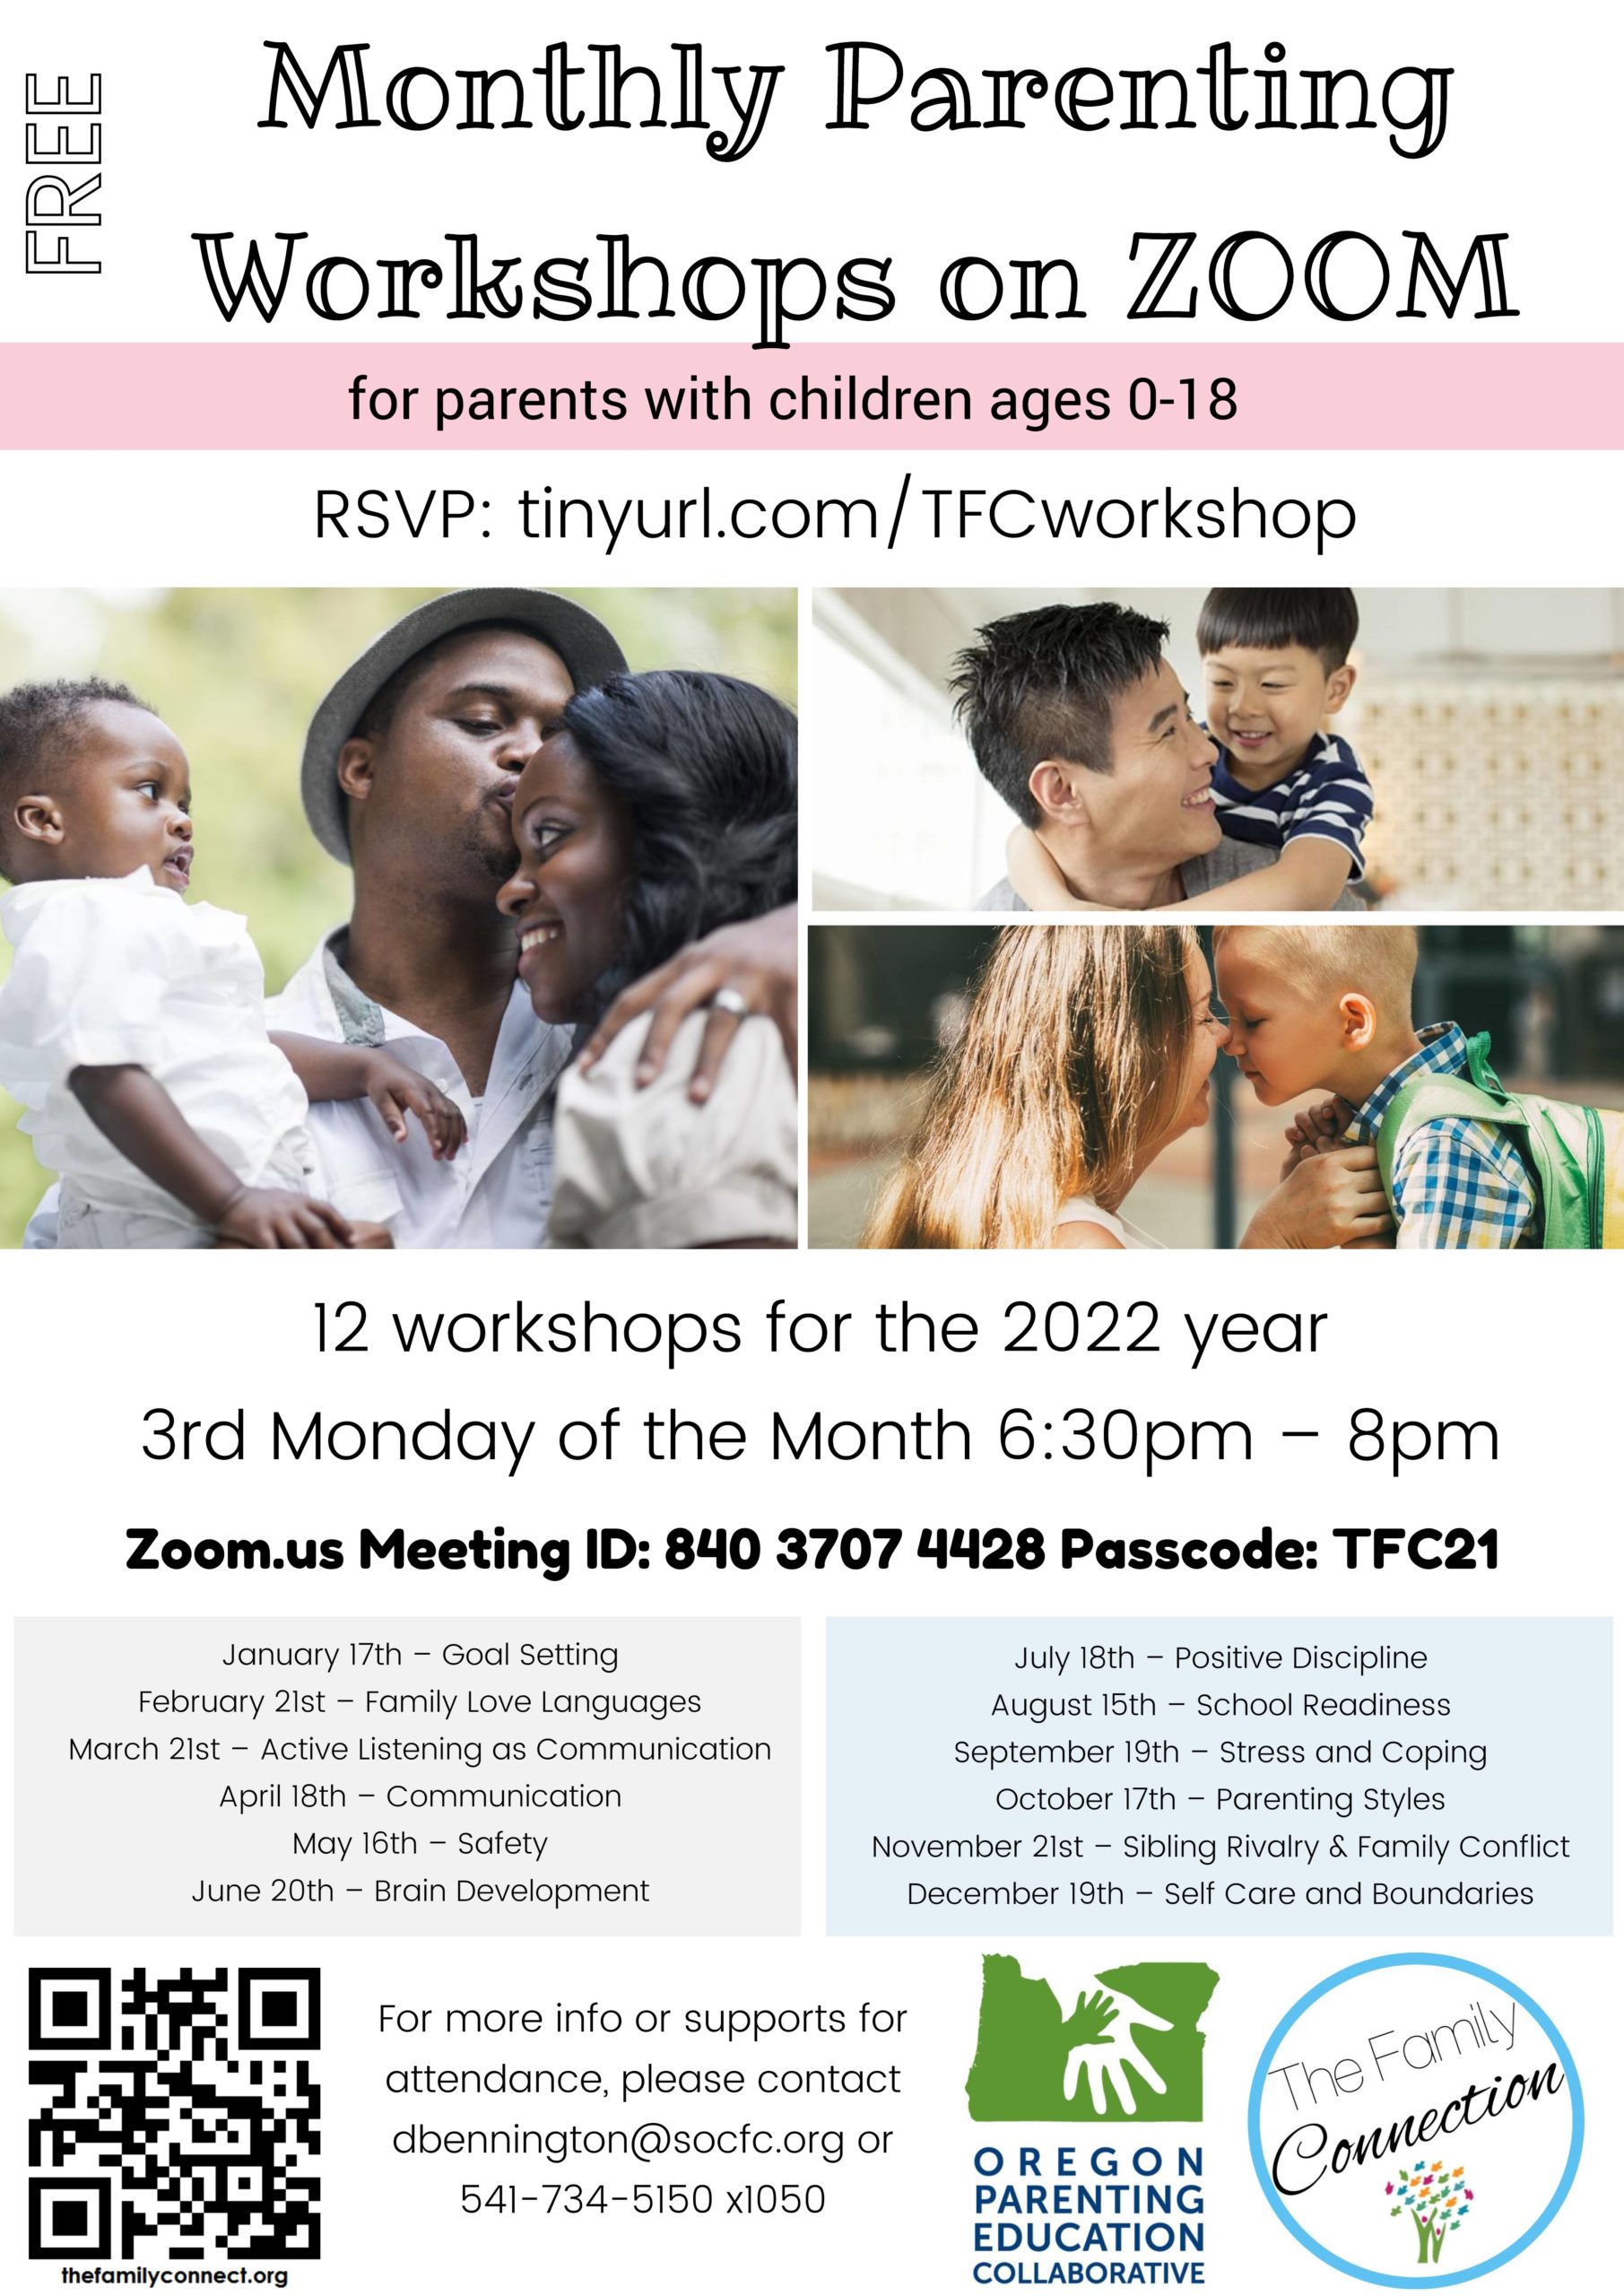 Monthly Parenting Workshops on Zoom